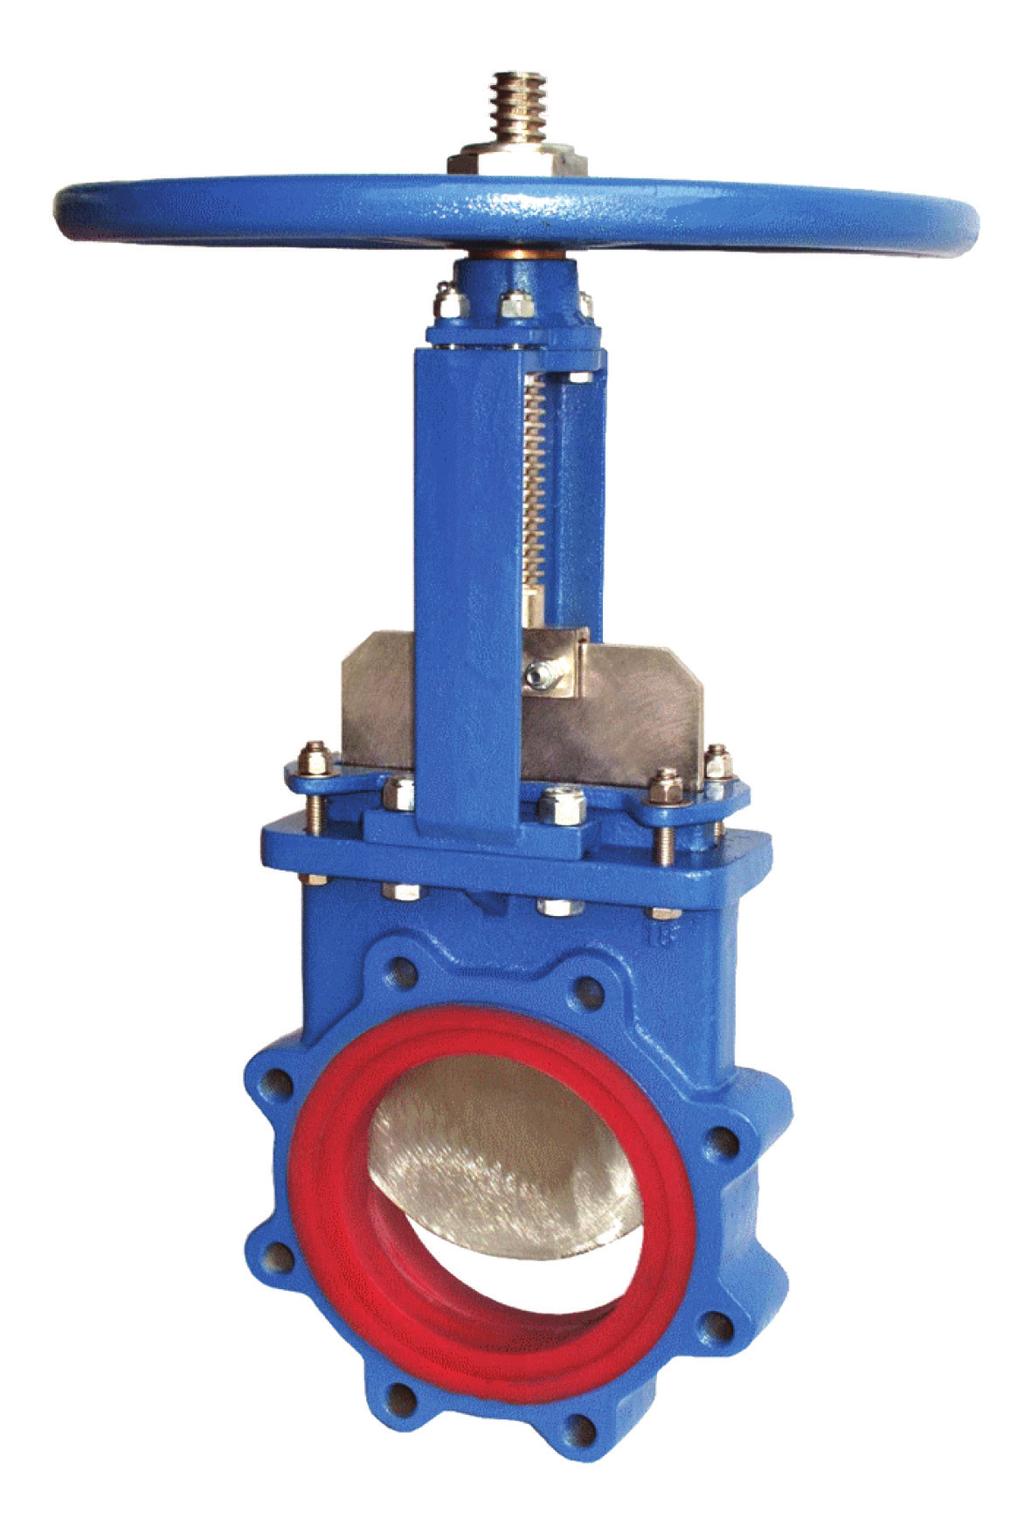 Figure 65 Urethane Lined Ductile Iron Body Knife Gate Valve Heavy duty cast ductile iron body, packing gland and yoke for the most rugged service. Heavy duty solid lug body design.